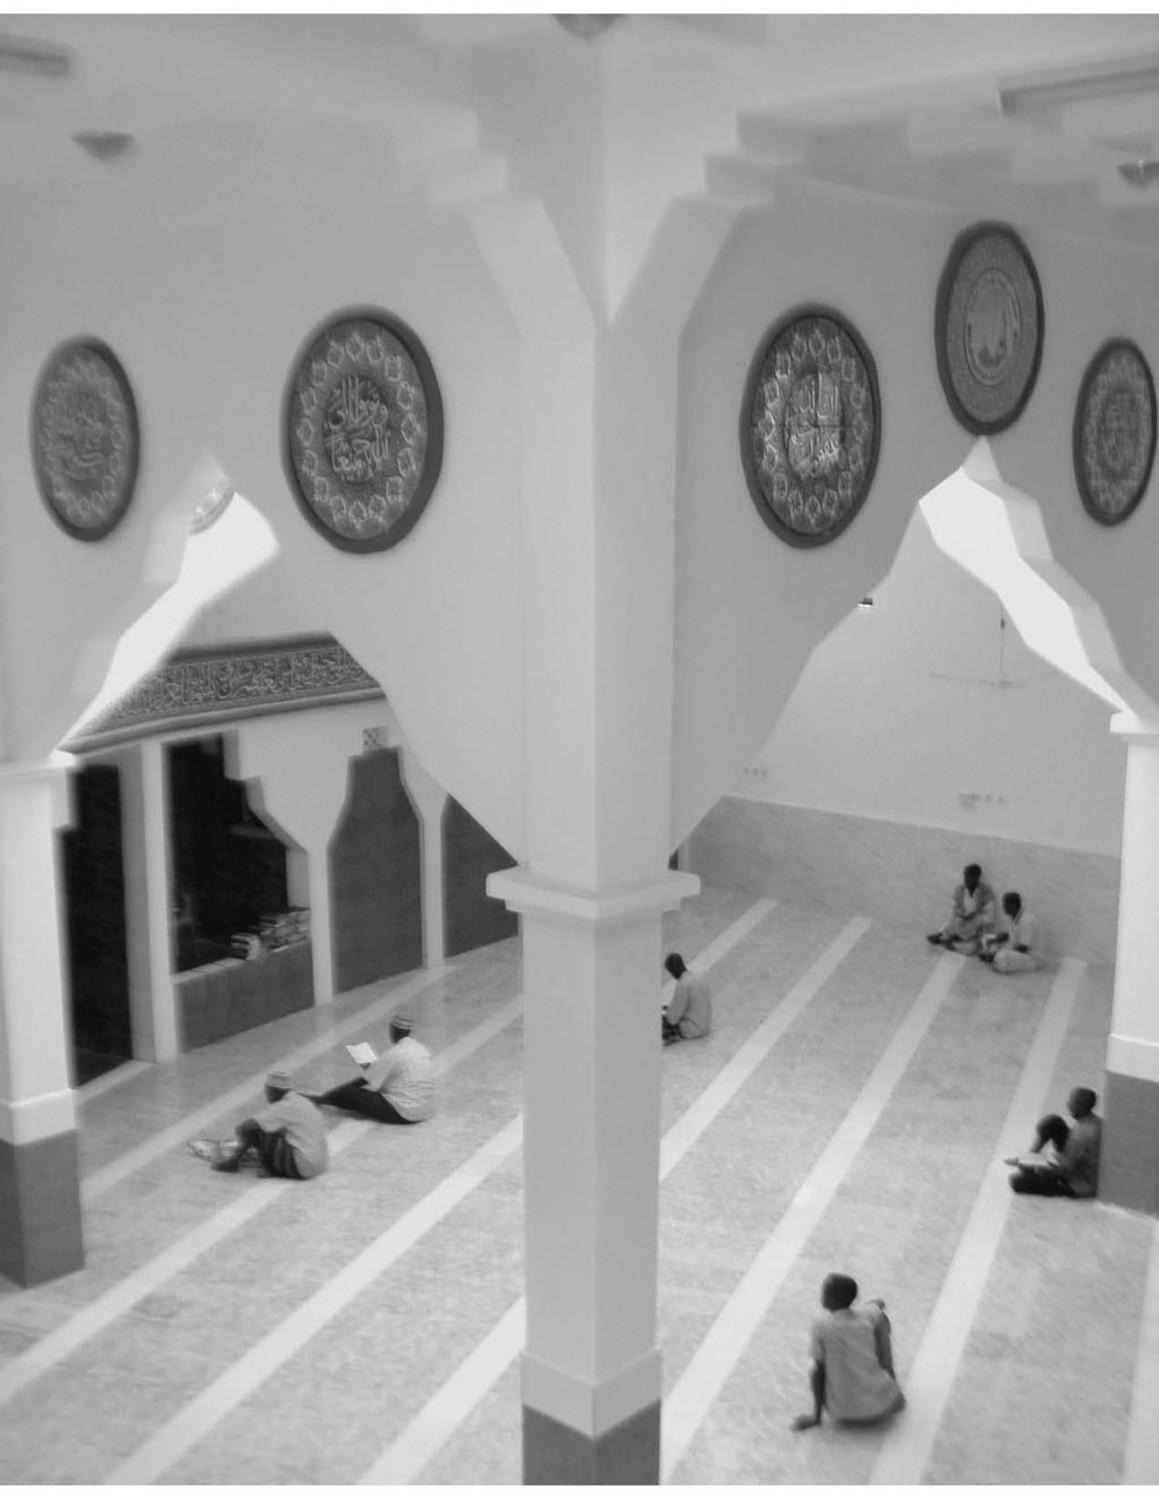 Main prayer hall from above with Chahar Taq and prayers lines